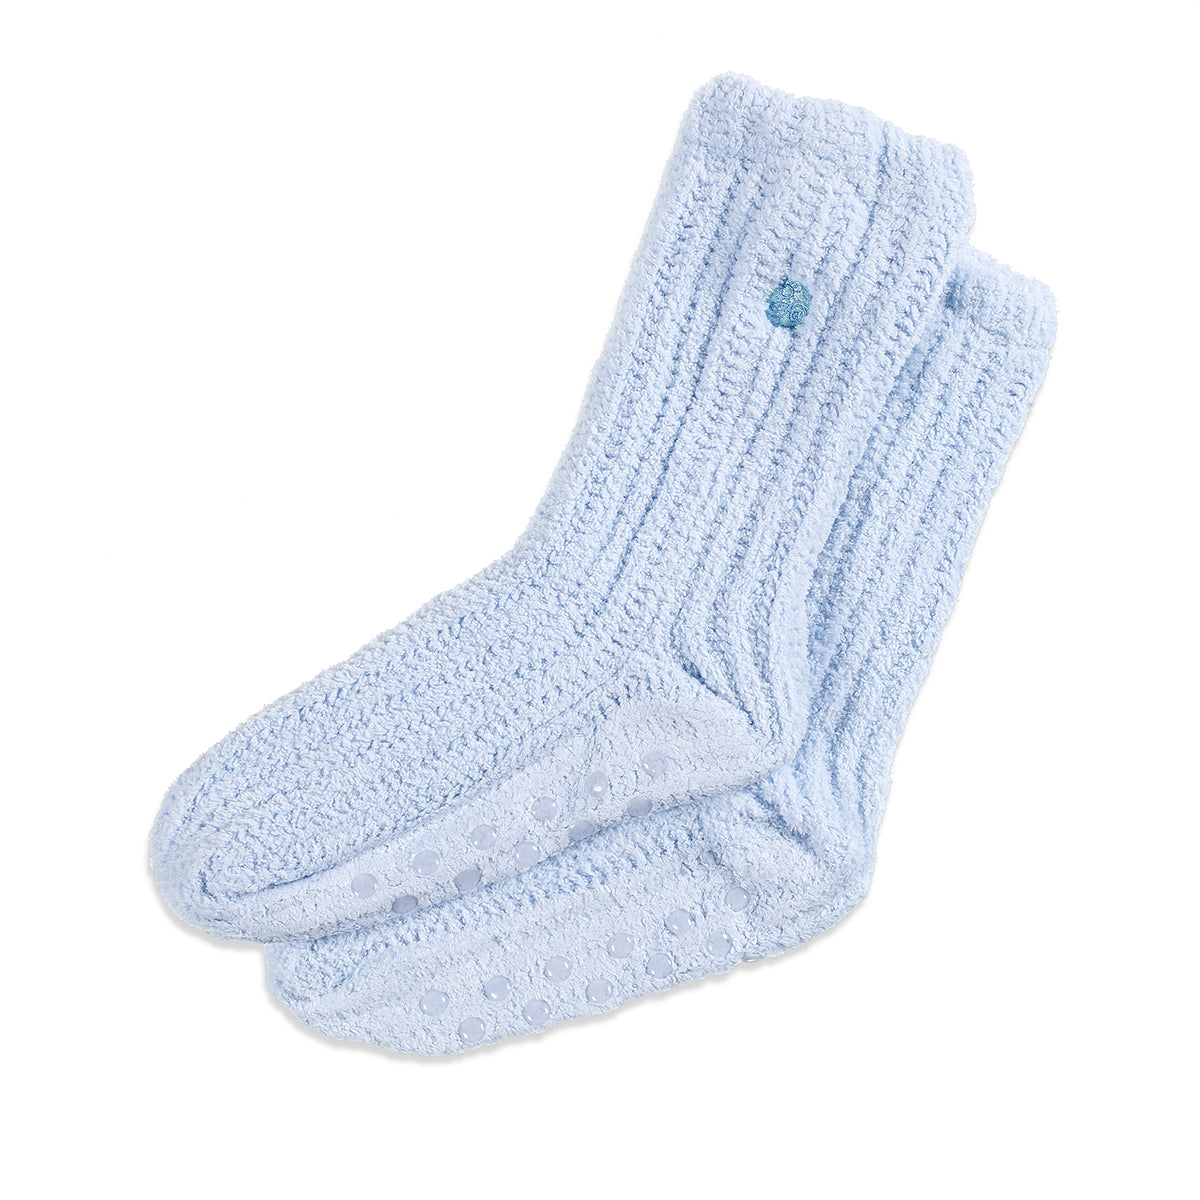 Natural Cozy Socks With Shea Butter | Therapeutic Cozy Socks | Socks ...